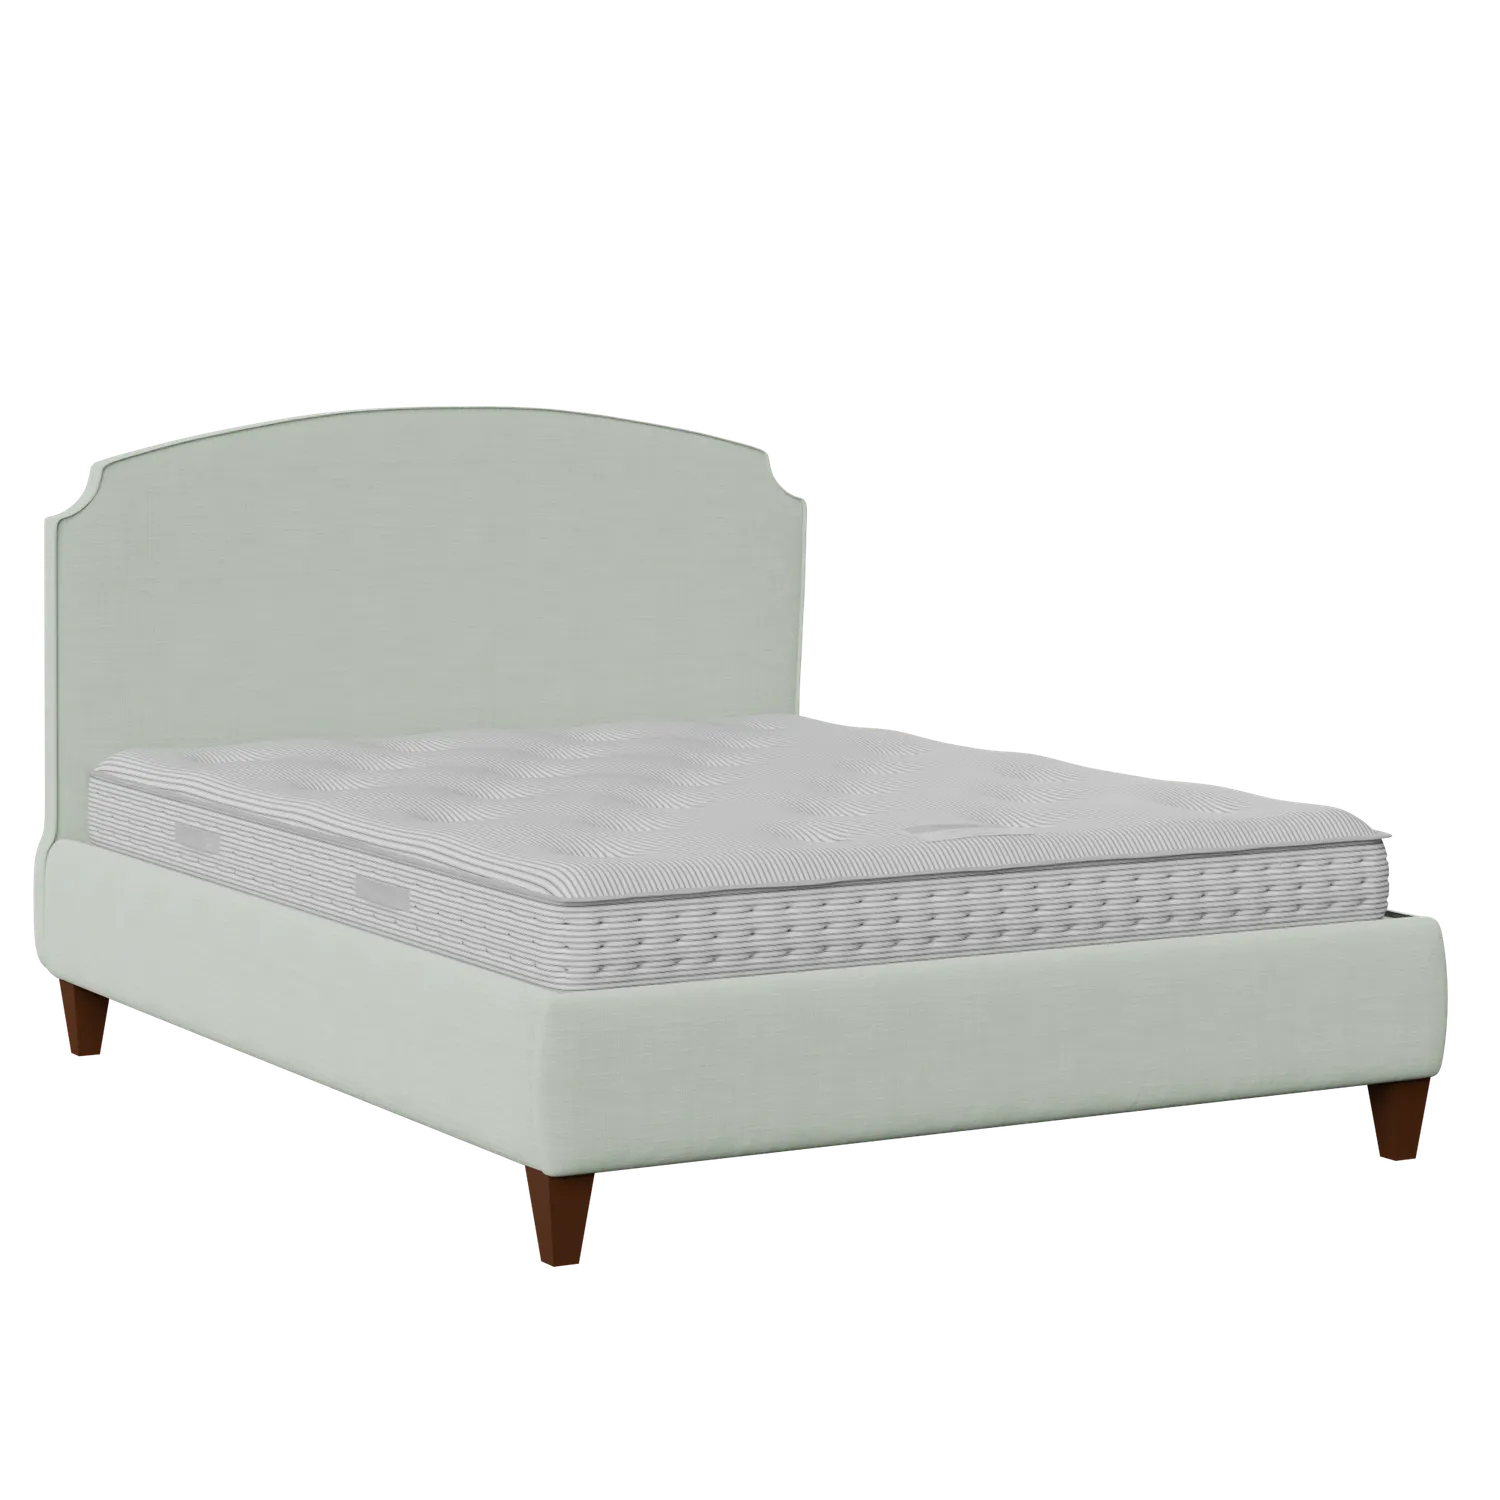 Lide with Piping upholstered bed in duckegg fabric